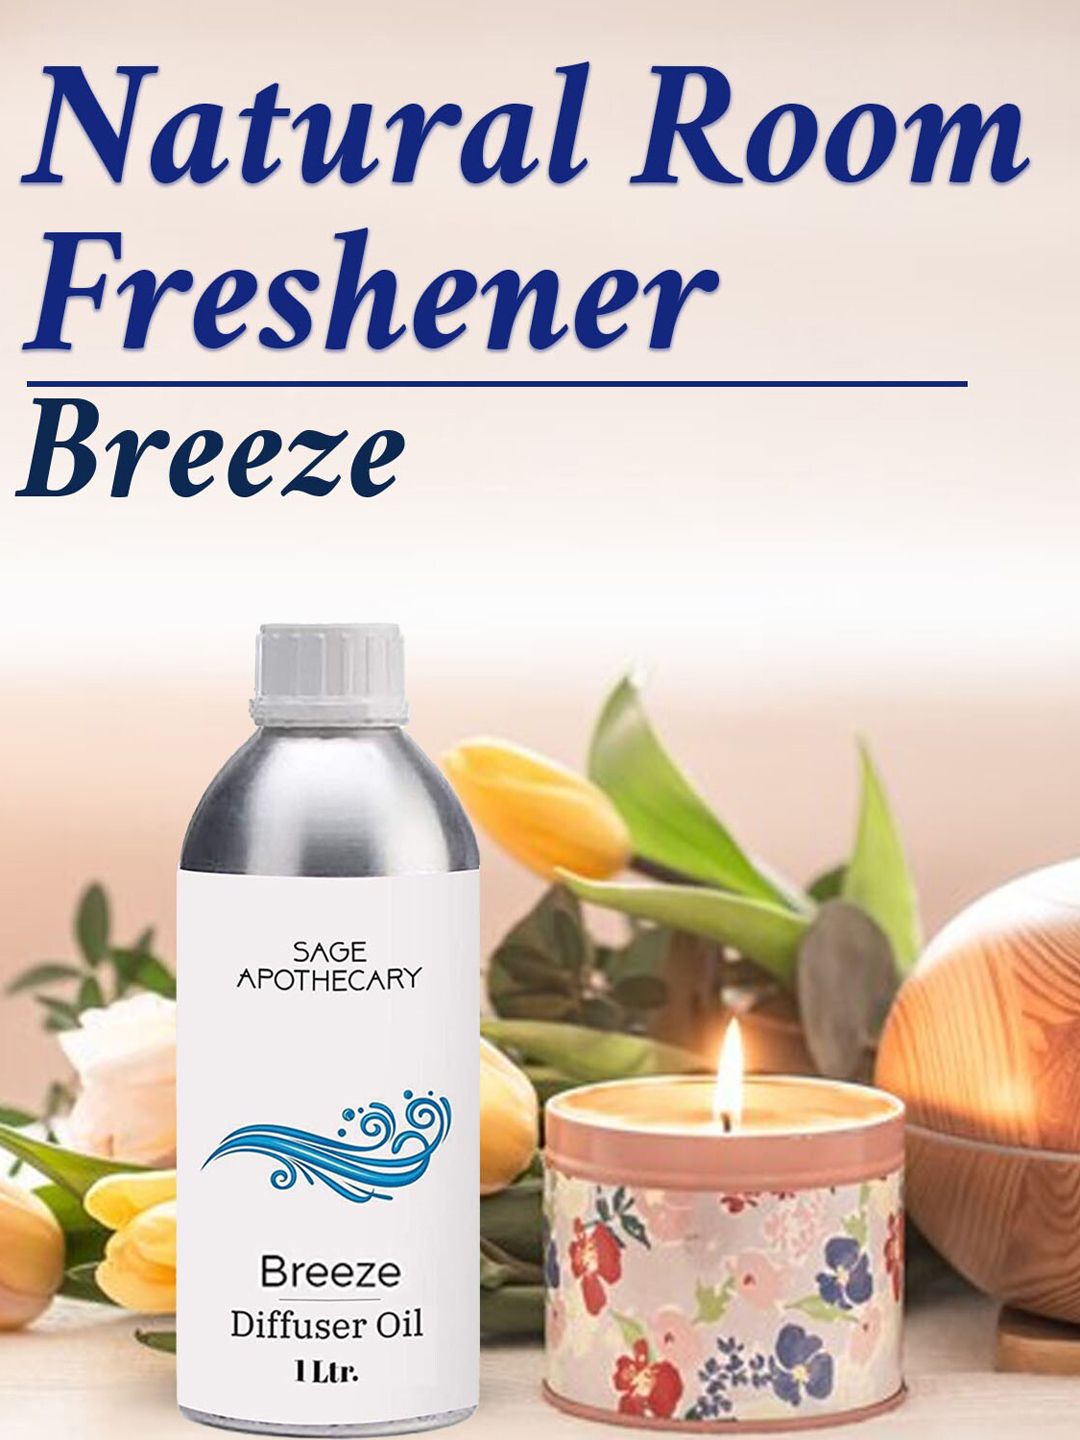 SAGE APOTHECARY Breeze Diffuser Oil for Anxiety Free Sleep - 1 Litre Price in India